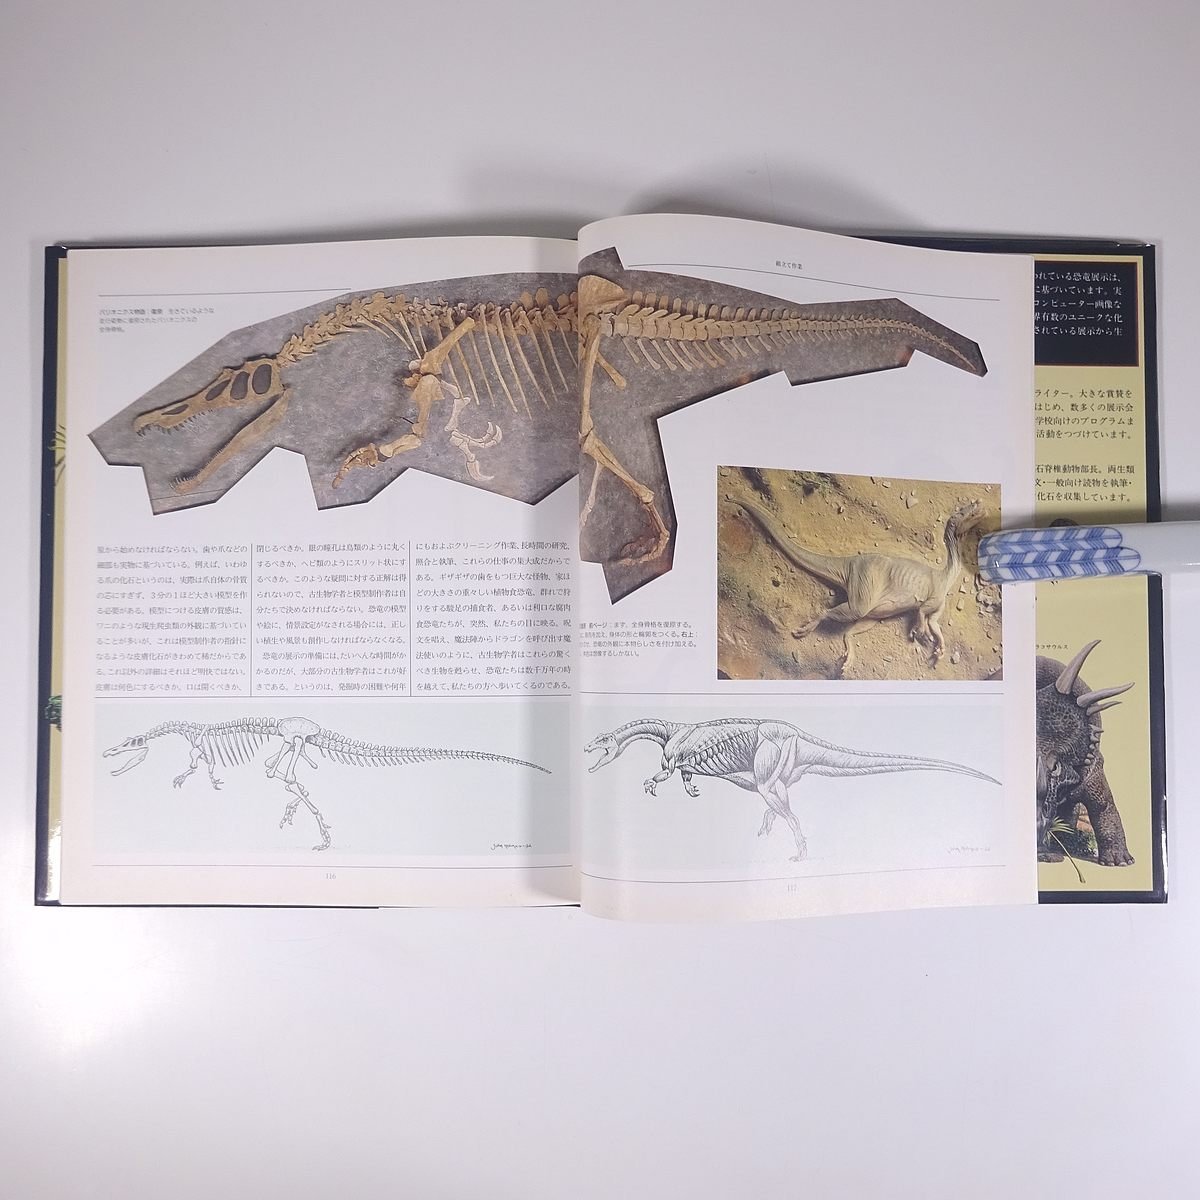  Britain nature history museum dinosaur tim* guard m work ... publish 1994 large this drawing version llustrated book archaeology 